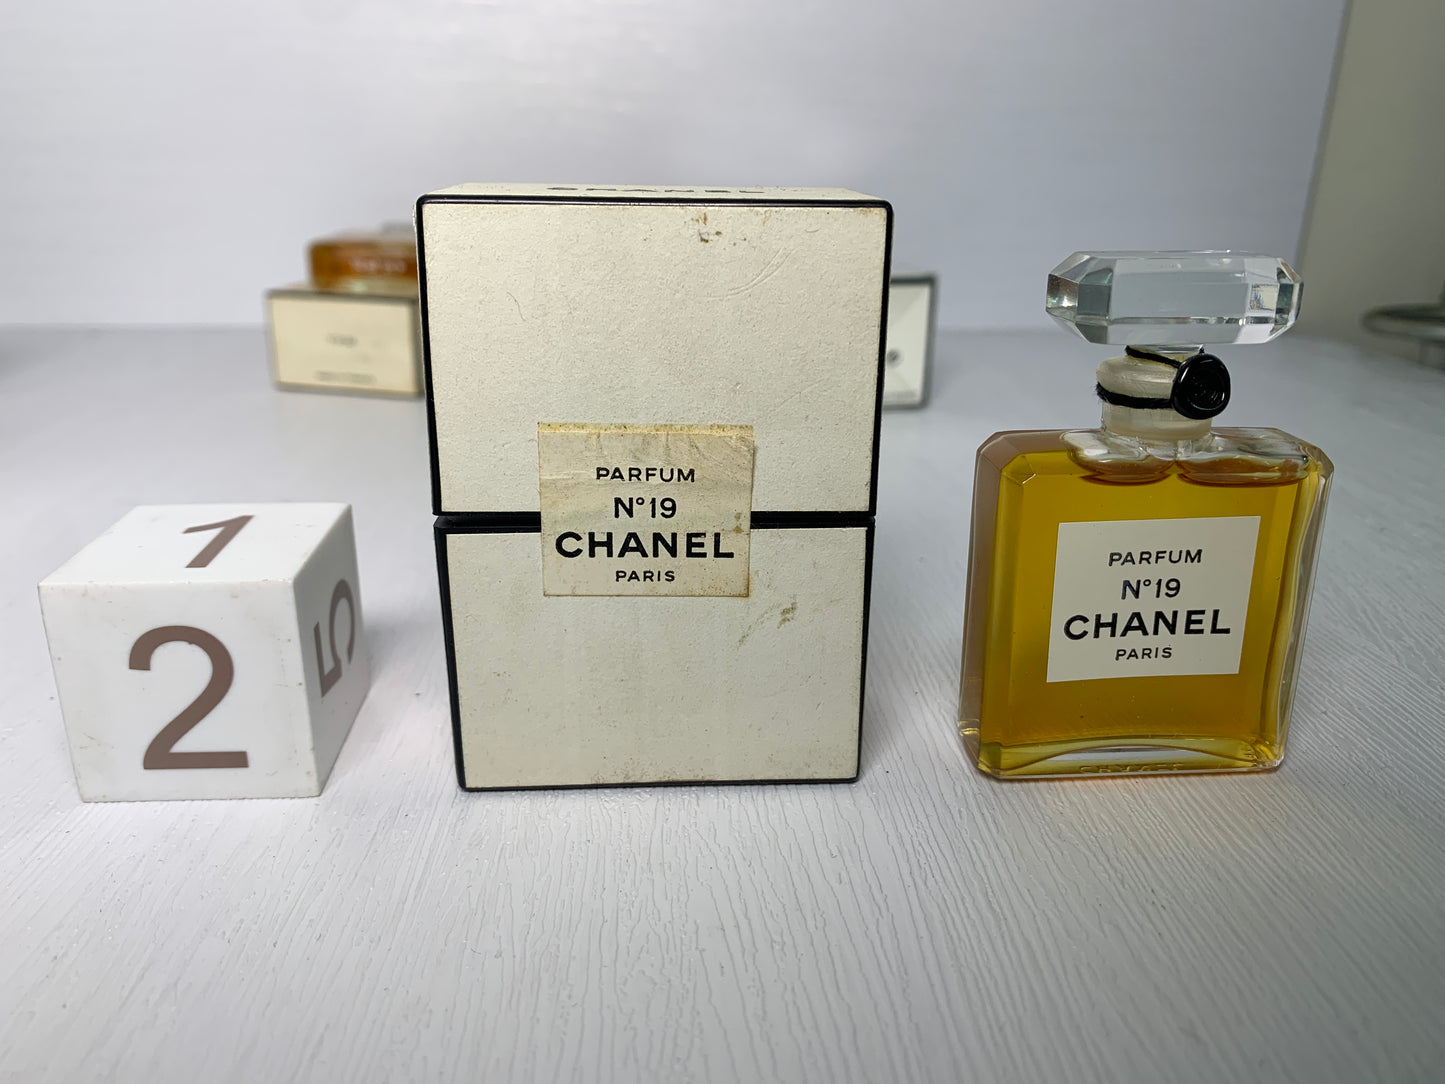 Authentic Discontinued Chanel 28ml No. 19 Paefum Perfume 70's to 90's Years - 28DEC22